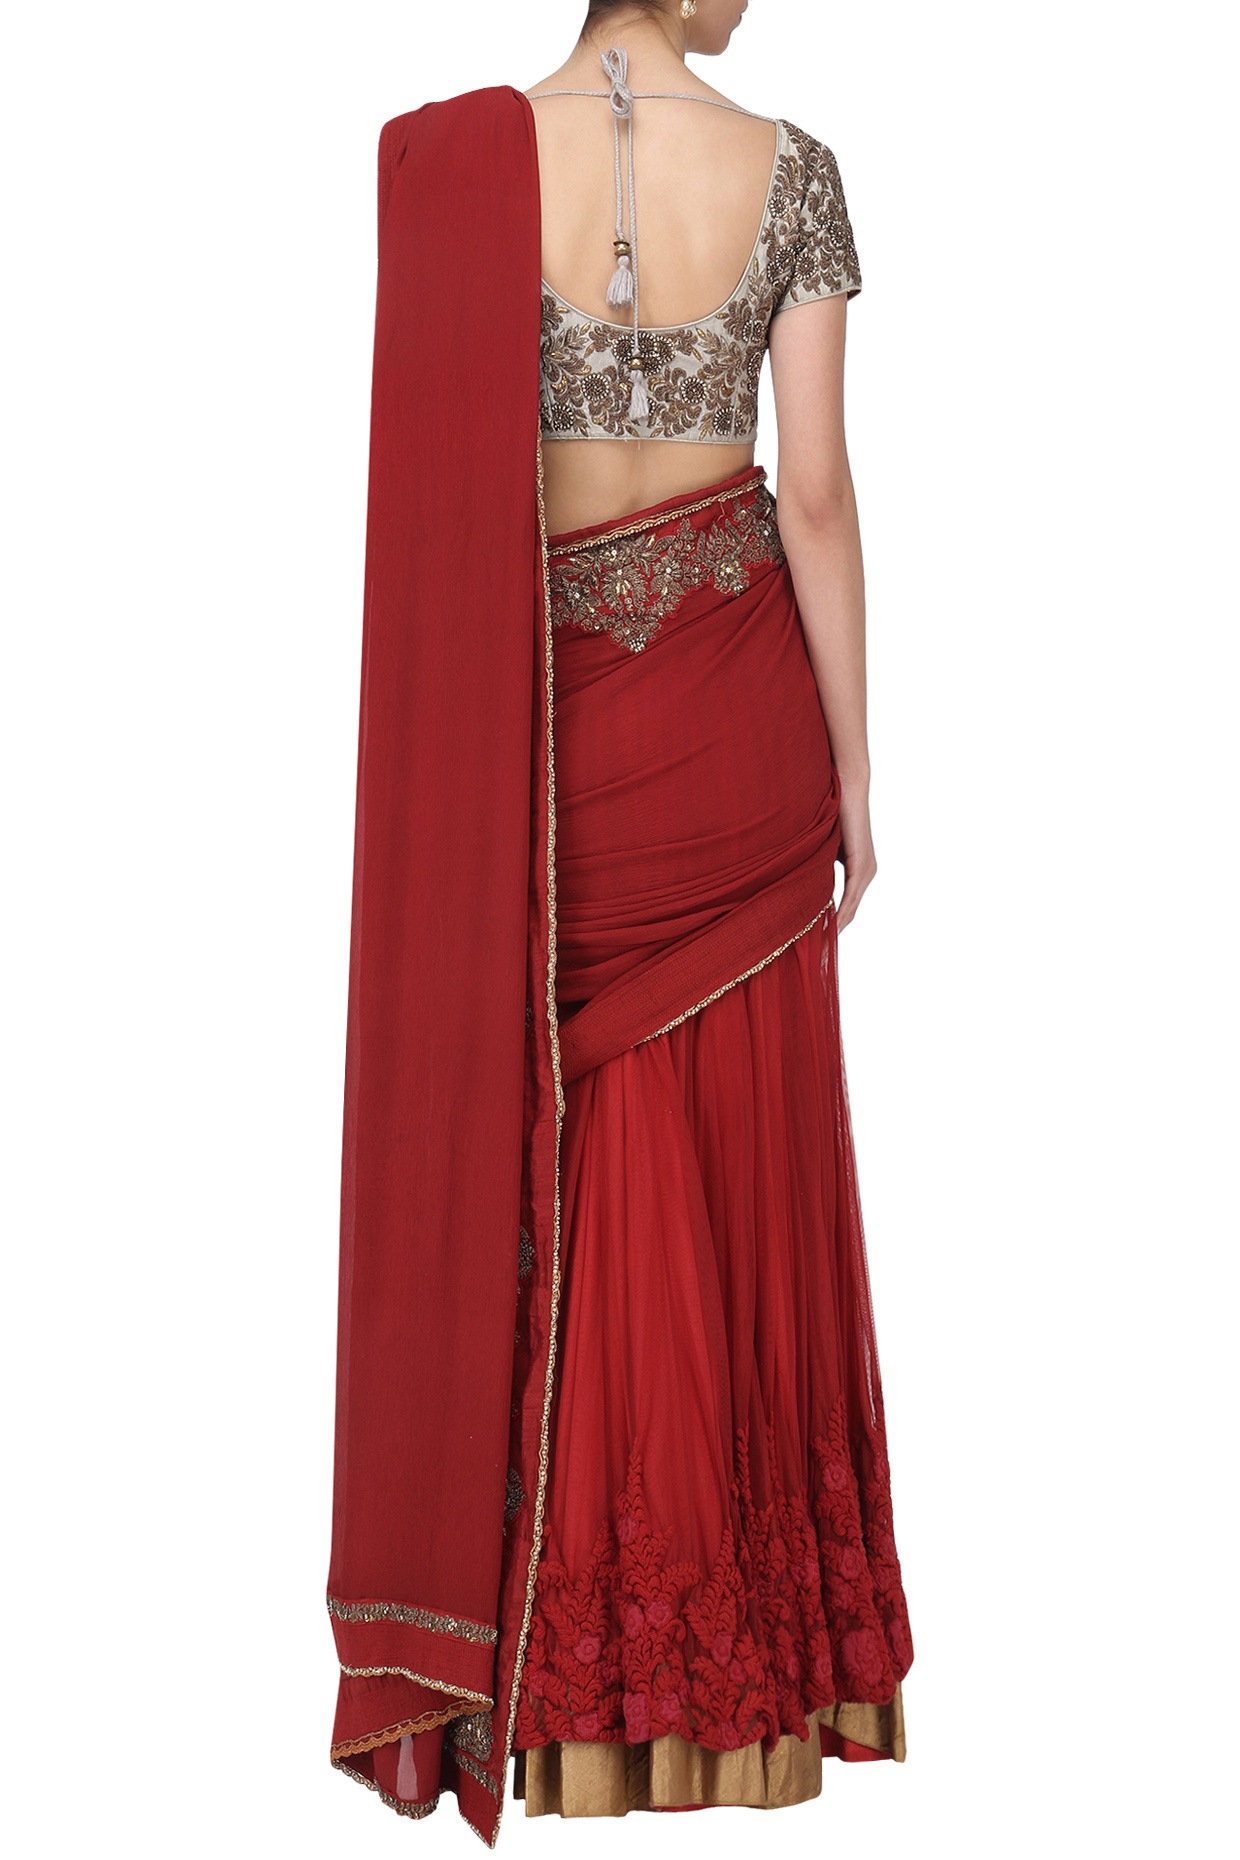 Deep Red Embroidered Lehenga Set (Set of 3) Design by Tabeer India at  Modvey | Modvey | Modvey